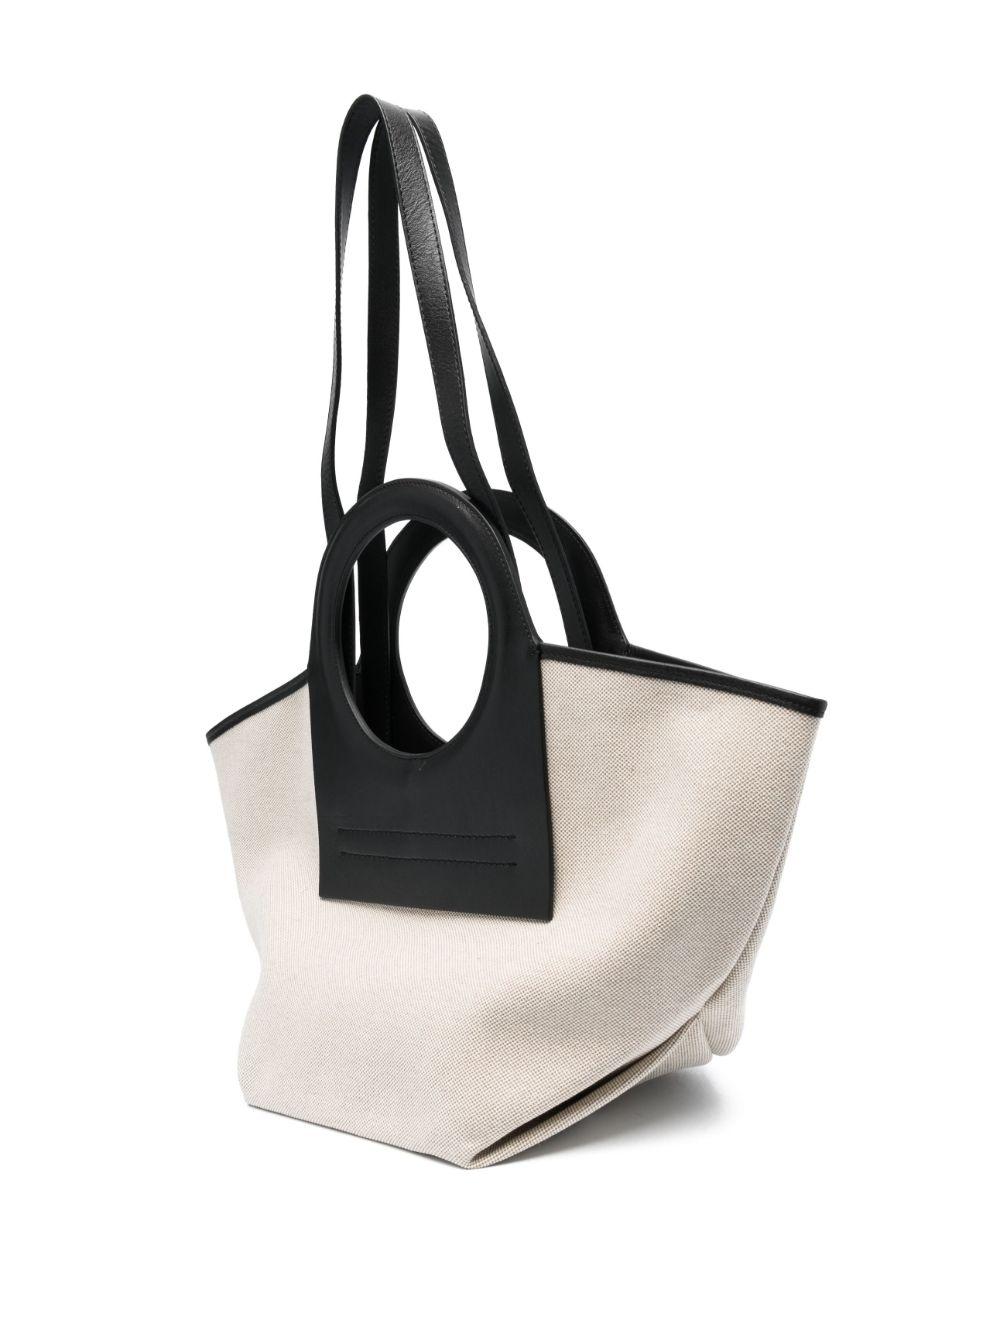 Hereu - Beige and Brown Chestnut Leather and Canvas Cala Tote Bag